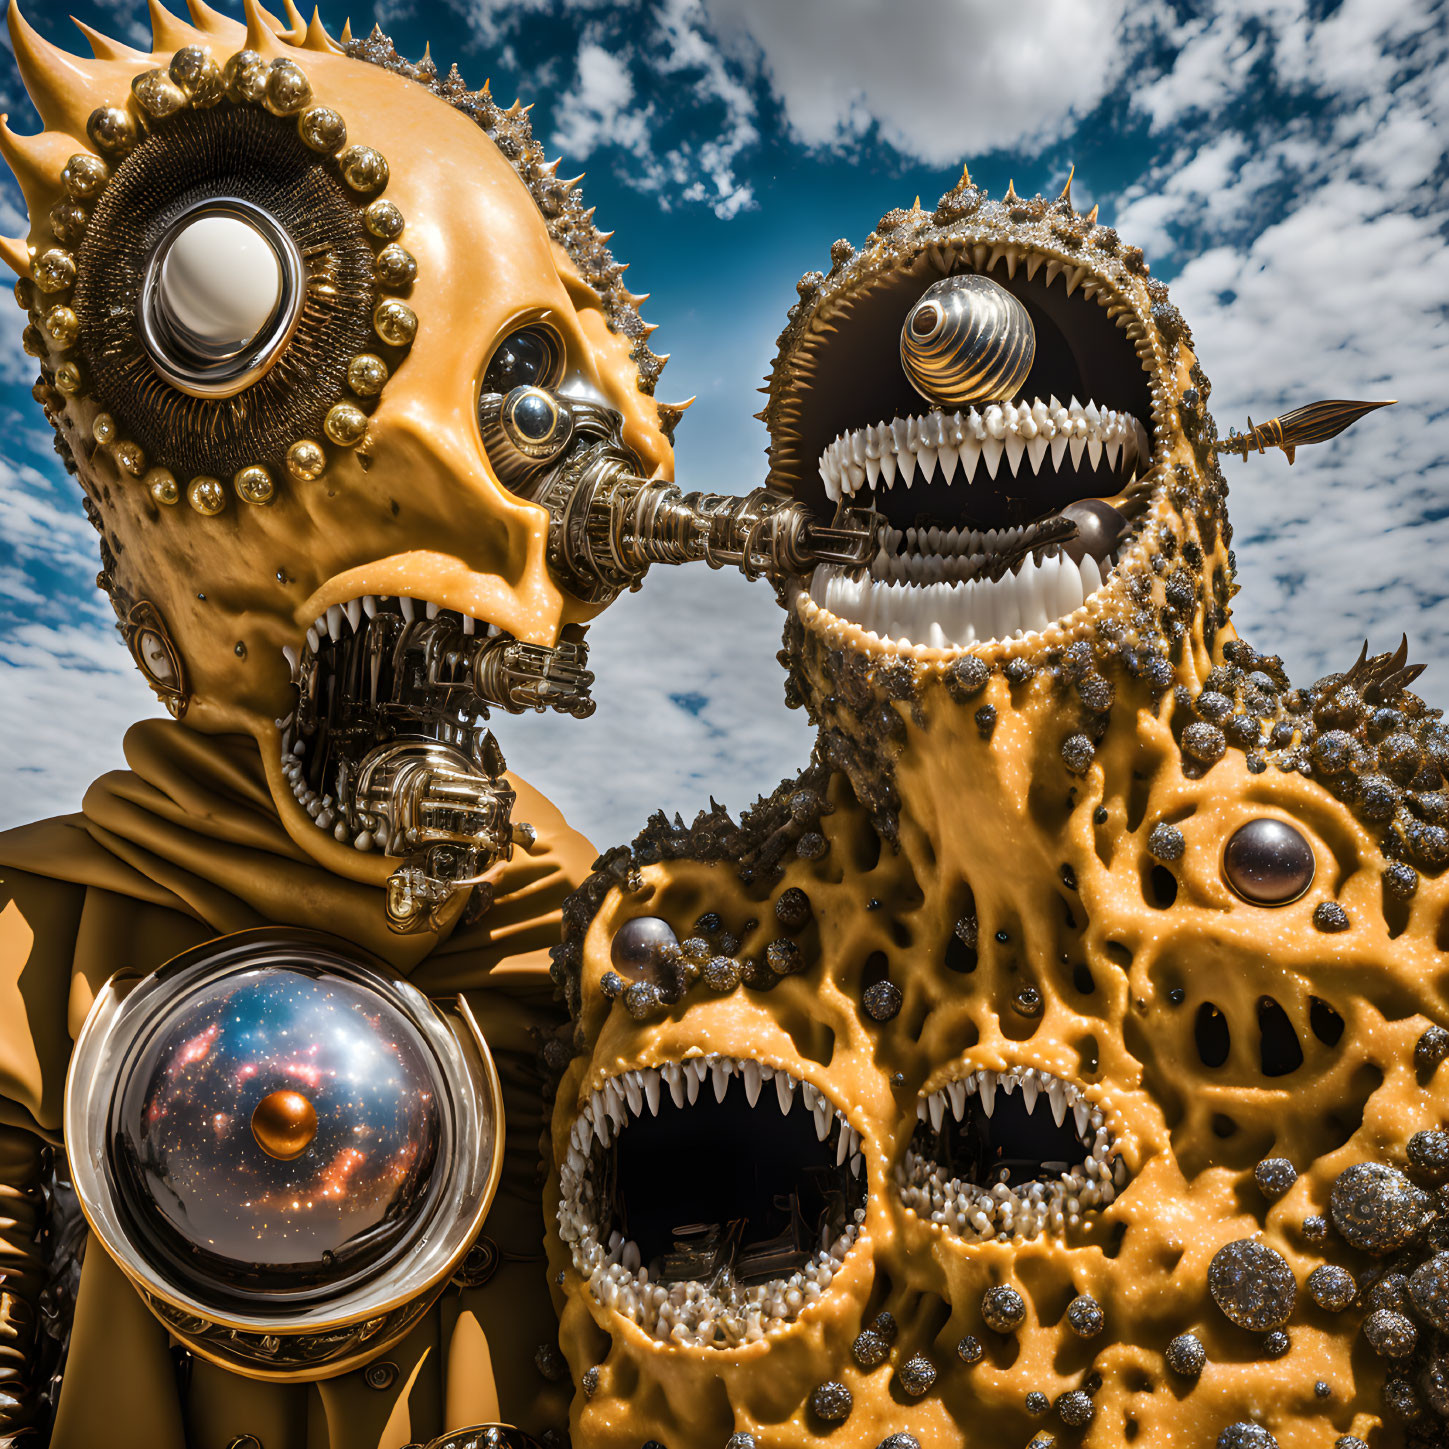 Surreal creatures with mechanical features and sharp teeth in cloudy blue sky